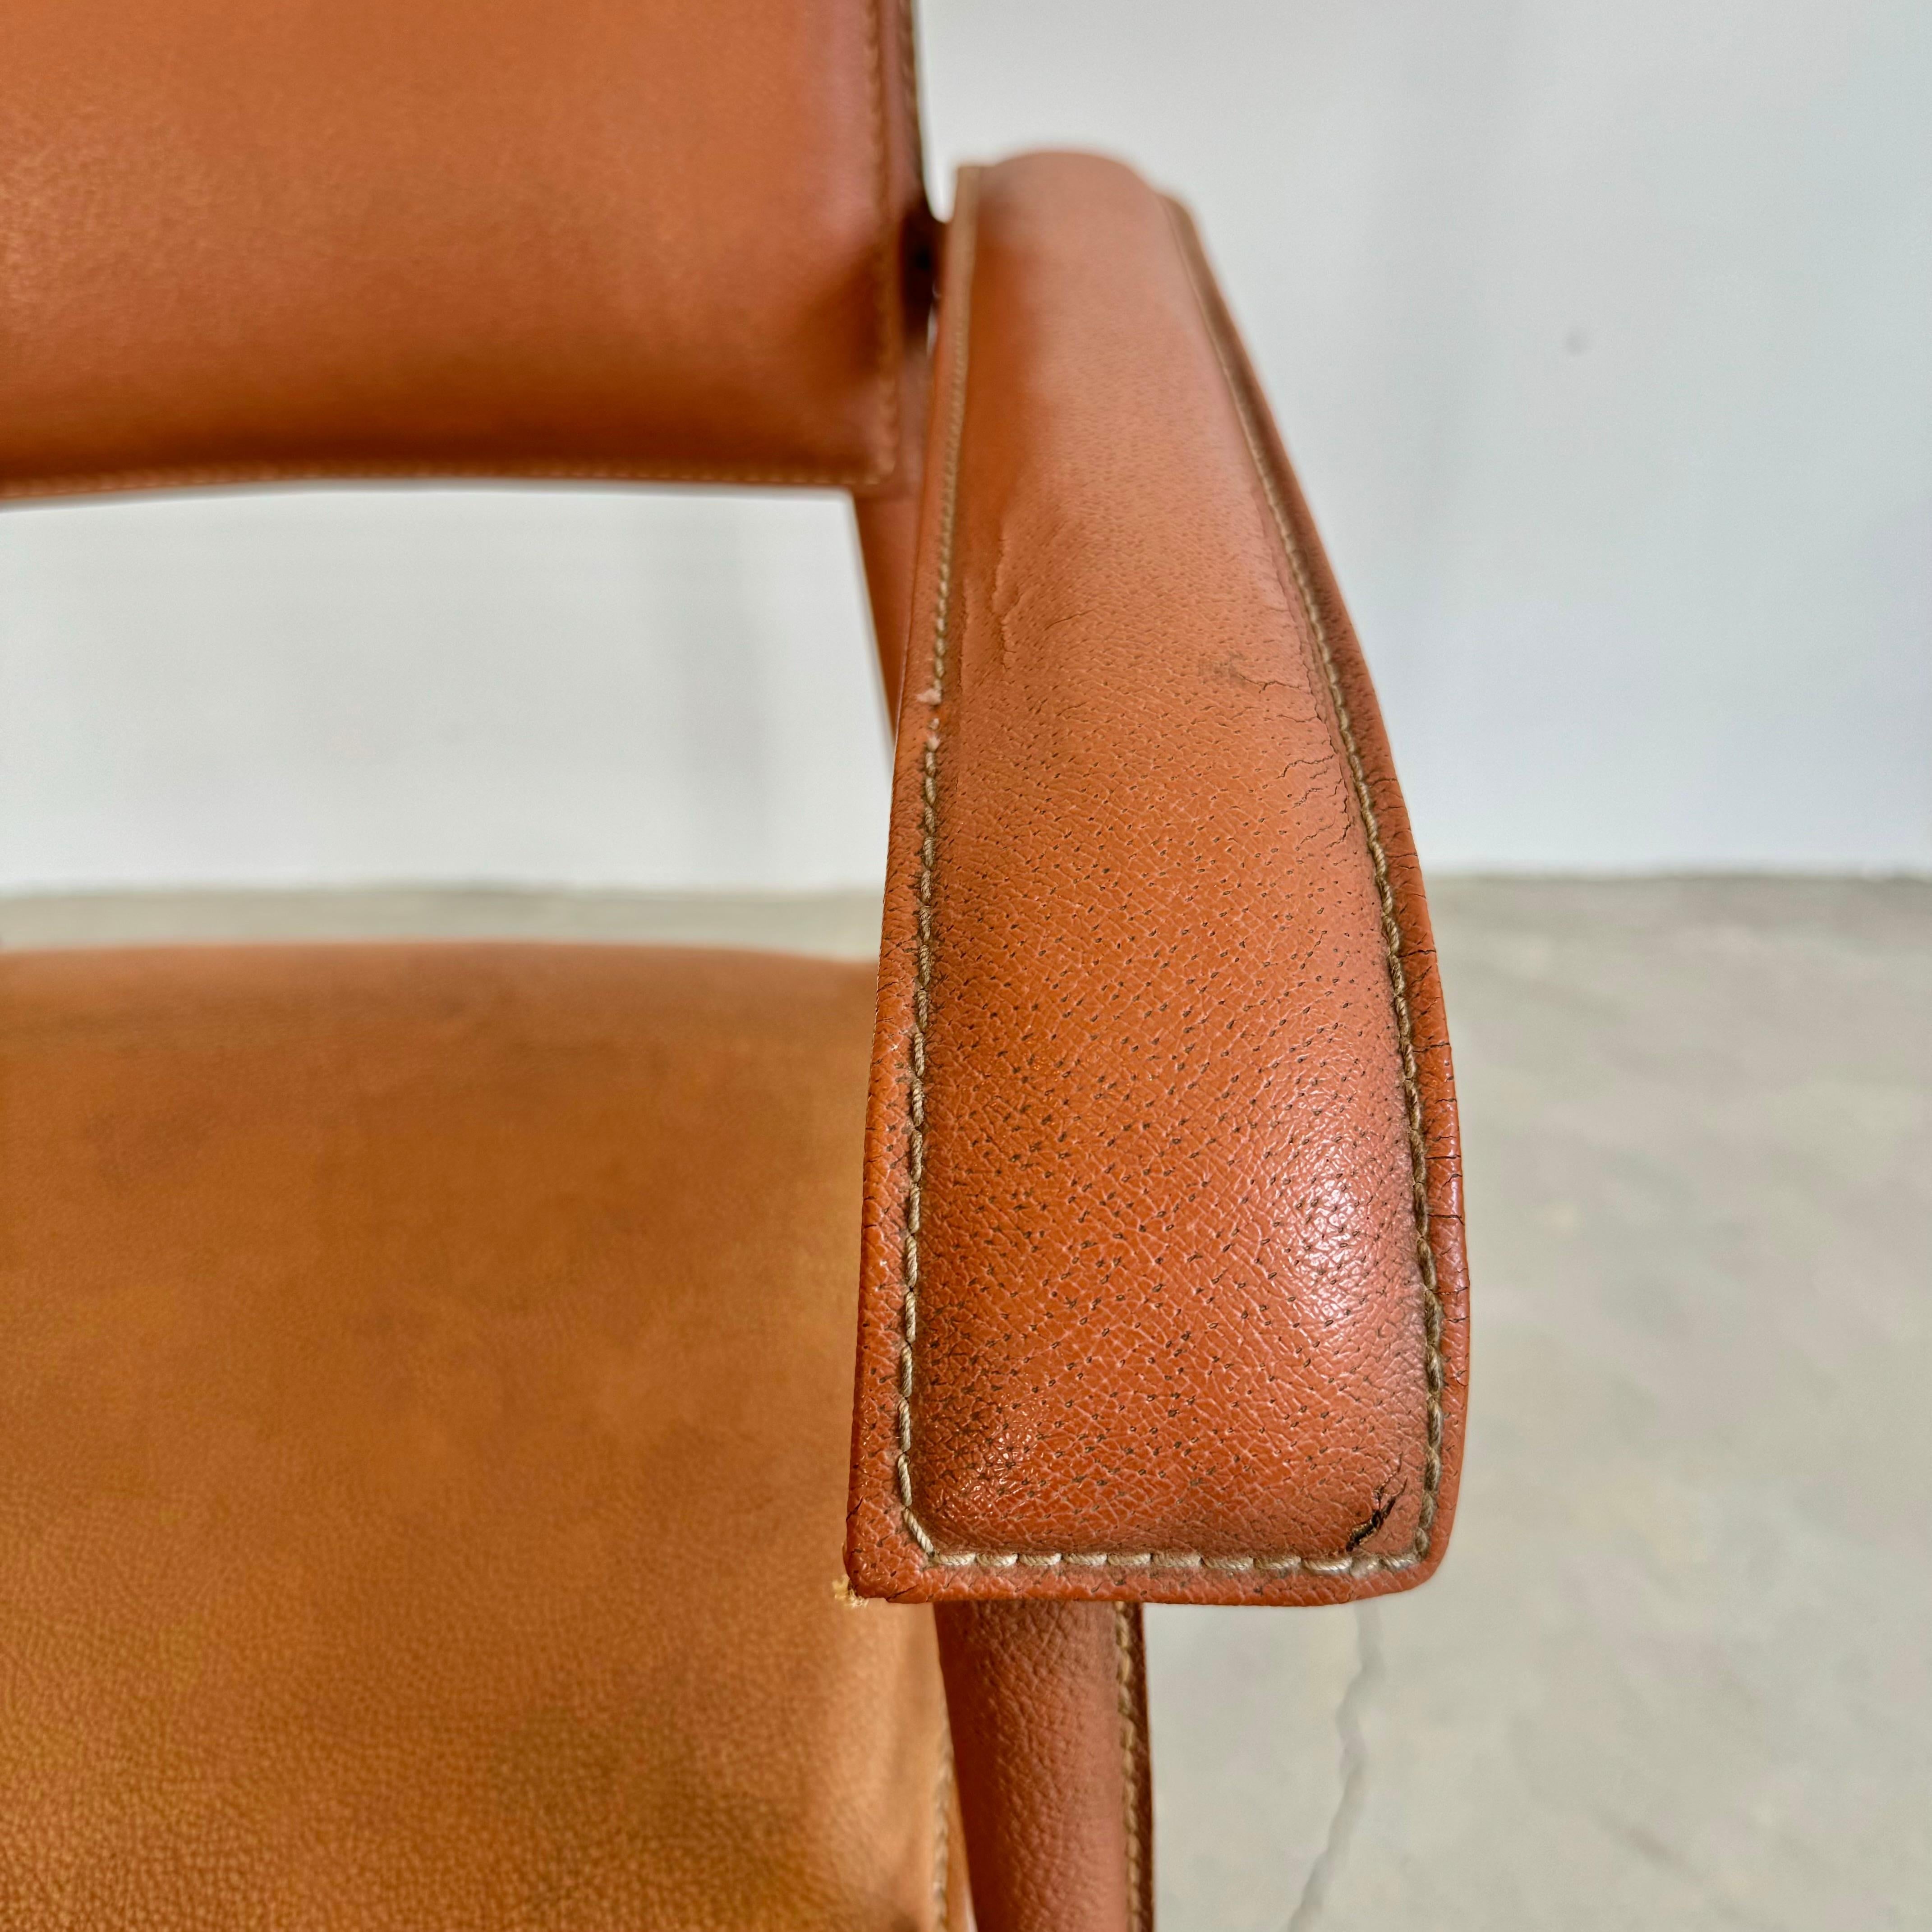 Jacques Adnet Leather Armchair, 1950s France For Sale 6